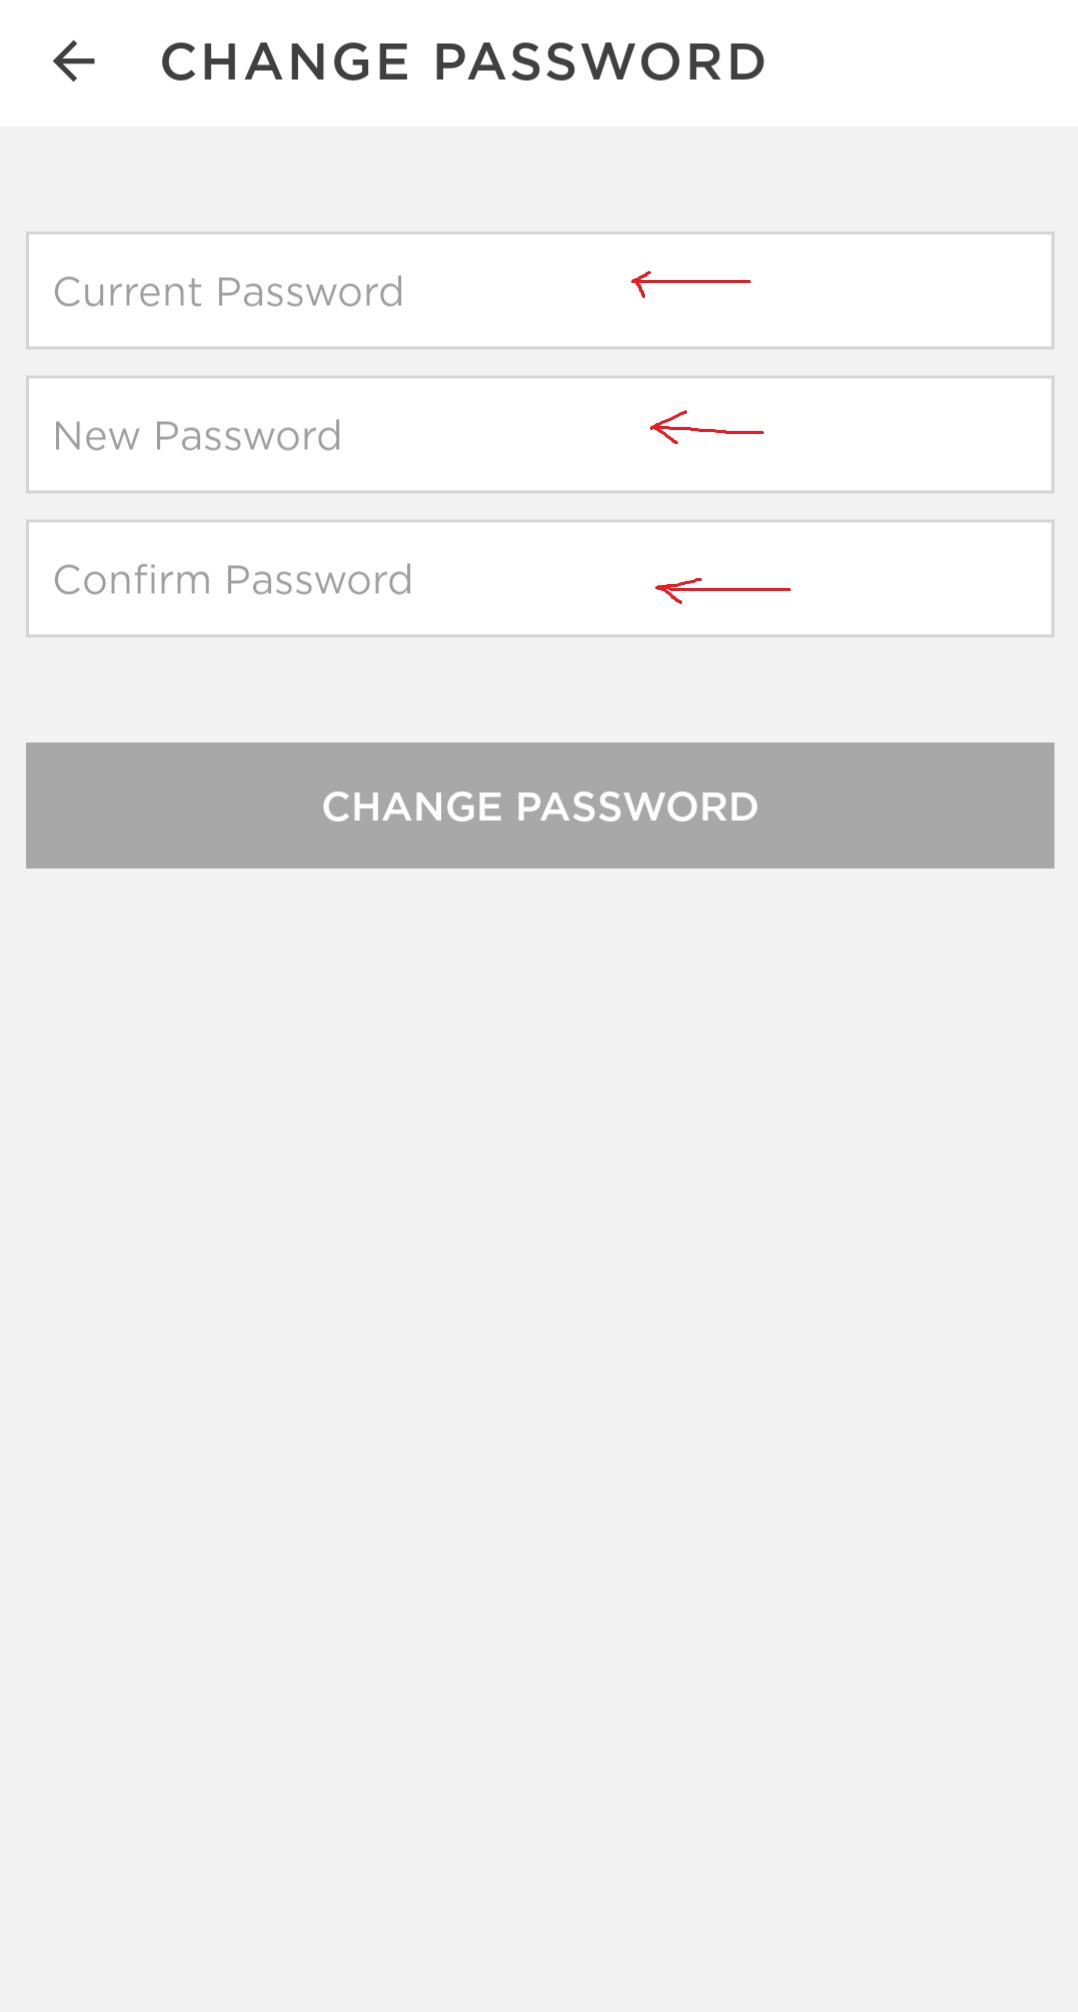 Click on the password change, enter your current and new password